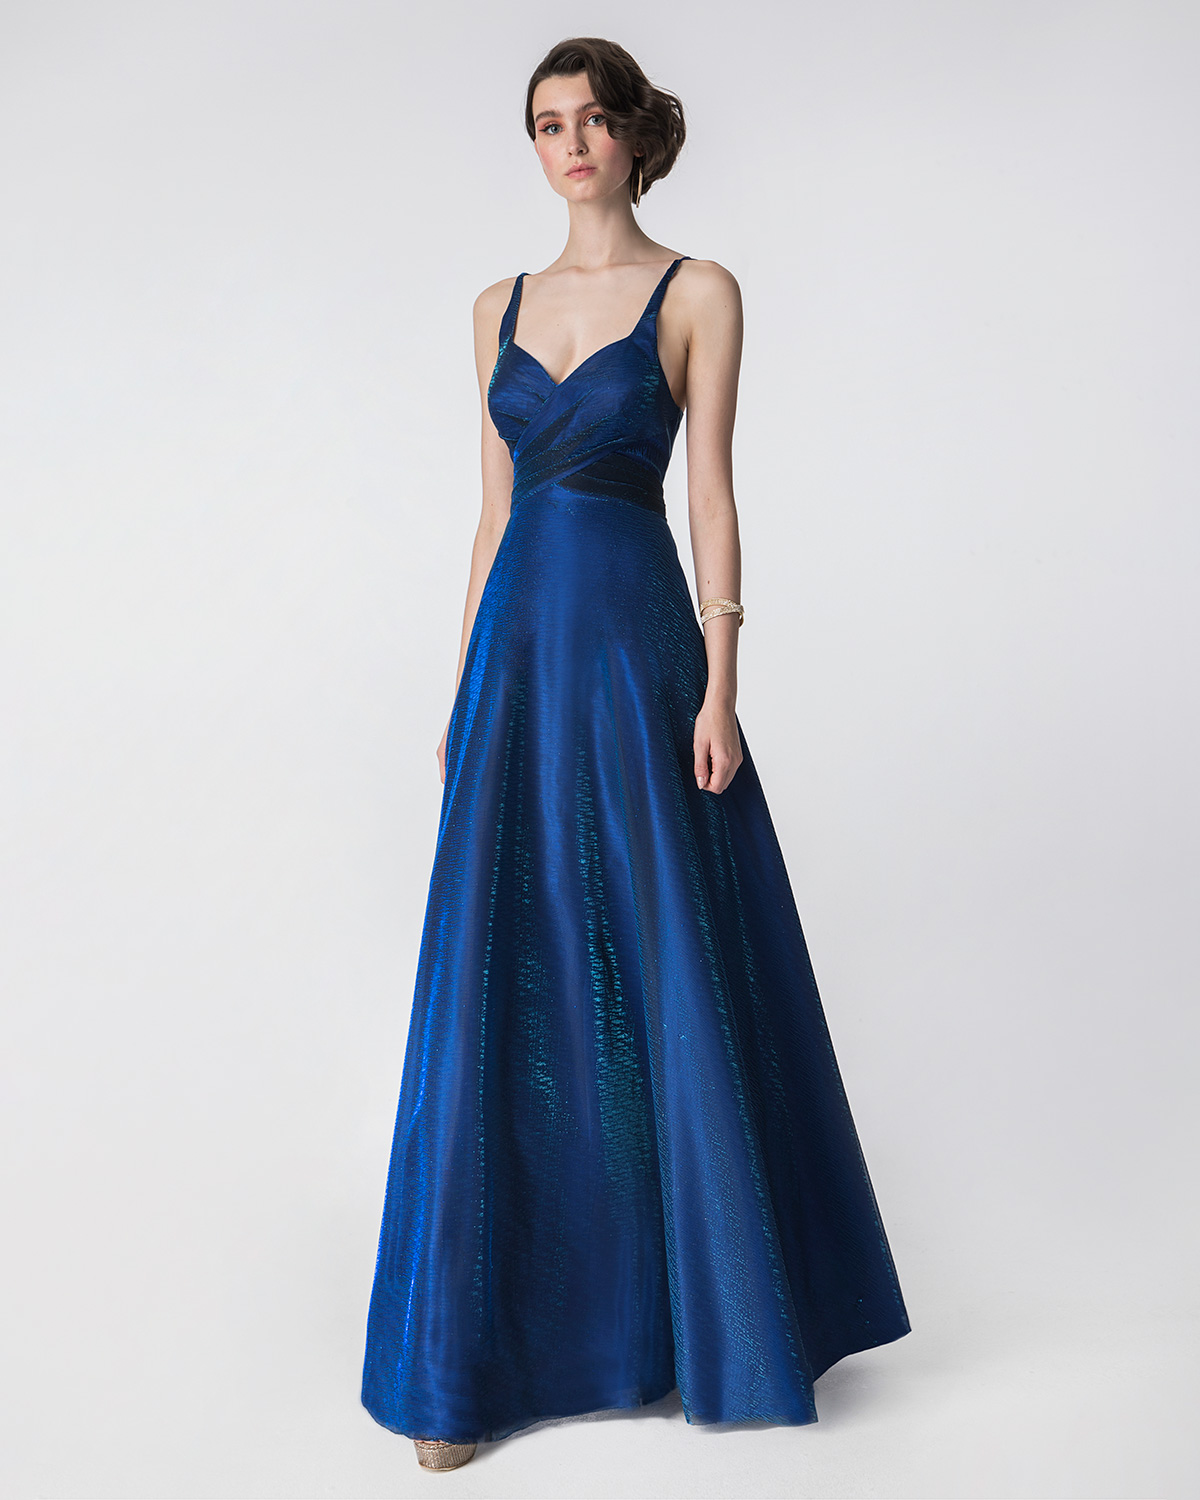 Cocktail Dresses / Long dress with shining fabric